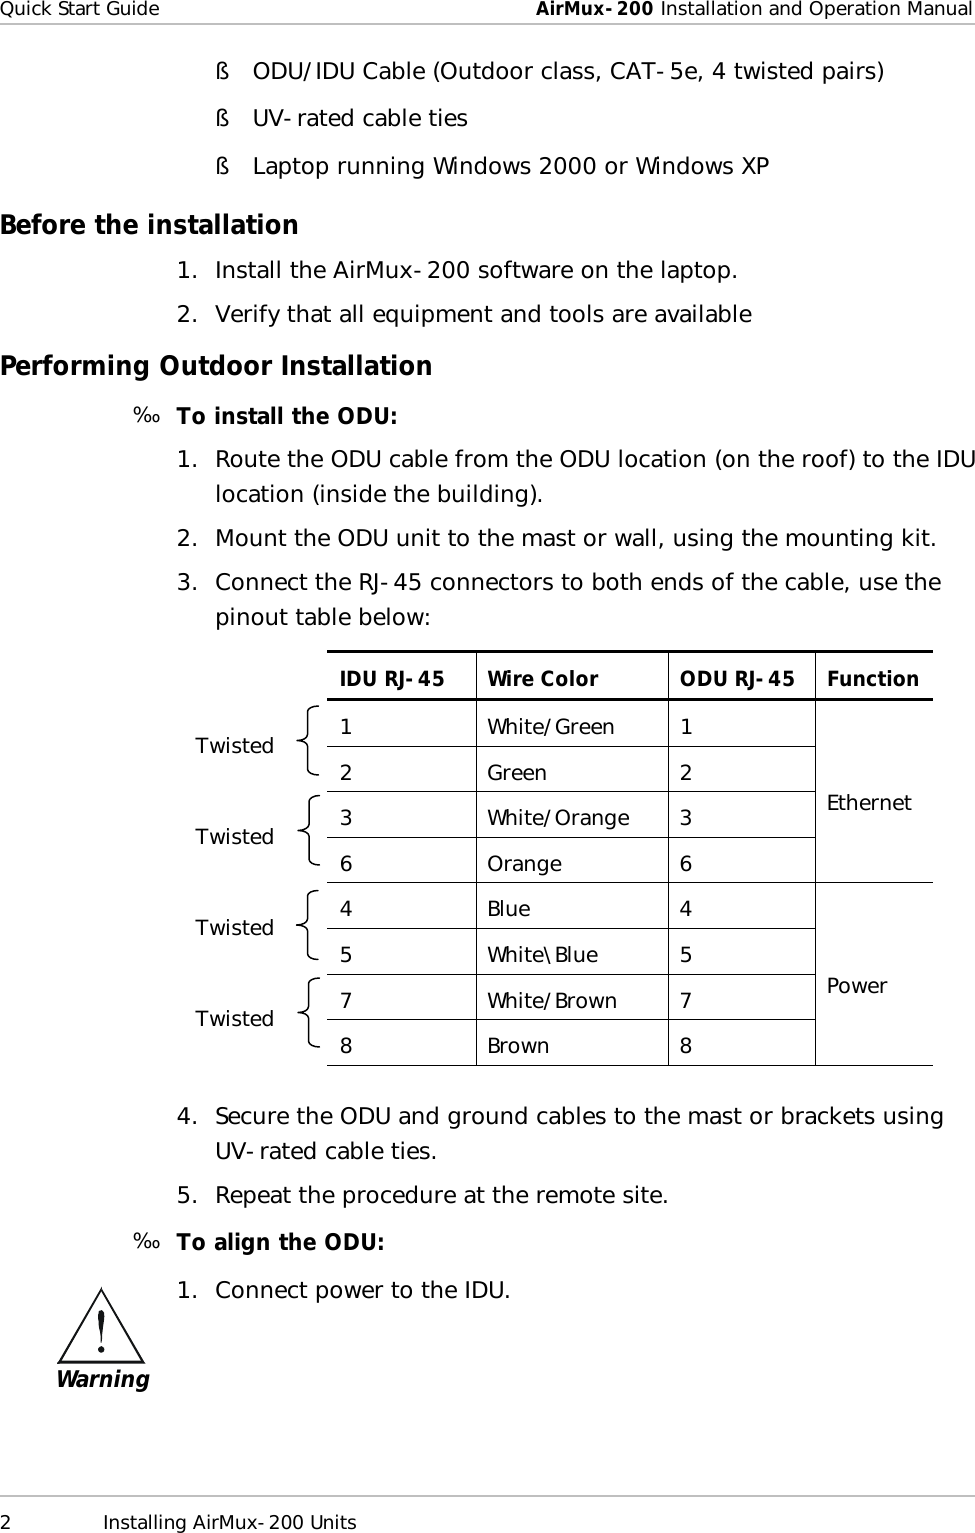 Quick Start Guide  AirMux-200 Installation and Operation Manual 2 Installing AirMux-200 Units  § ODU/IDU Cable (Outdoor class, CAT-5e, 4 twisted pairs) § UV-rated cable ties § Laptop running Windows 2000 or Windows XP Before the installation 1. Install the AirMux-200 software on the laptop. 2. Verify that all equipment and tools are available Performing Outdoor Installation ä  To install the ODU: 1. Route the ODU cable from the ODU location (on the roof) to the IDU location (inside the building). 2. Mount the ODU unit to the mast or wall, using the mounting kit. 3. Connect the RJ-45 connectors to both ends of the cable, use the pinout table below:   IDU RJ-45 Wire Color ODU RJ-45 Function 1 White/Green 1 Twisted  2 Green 2 3 White/Orange 3 Twisted  6 Orange 6 Ethernet 4 Blue 4 Twisted  5 White\Blue 5 7 White/Brown 7 Twisted  8 Brown 8 Power  4. Secure the ODU and ground cables to the mast or brackets using UV-rated cable ties. 5. Repeat the procedure at the remote site. ä  To align the ODU: 1. Connect power to the IDU. Warning 